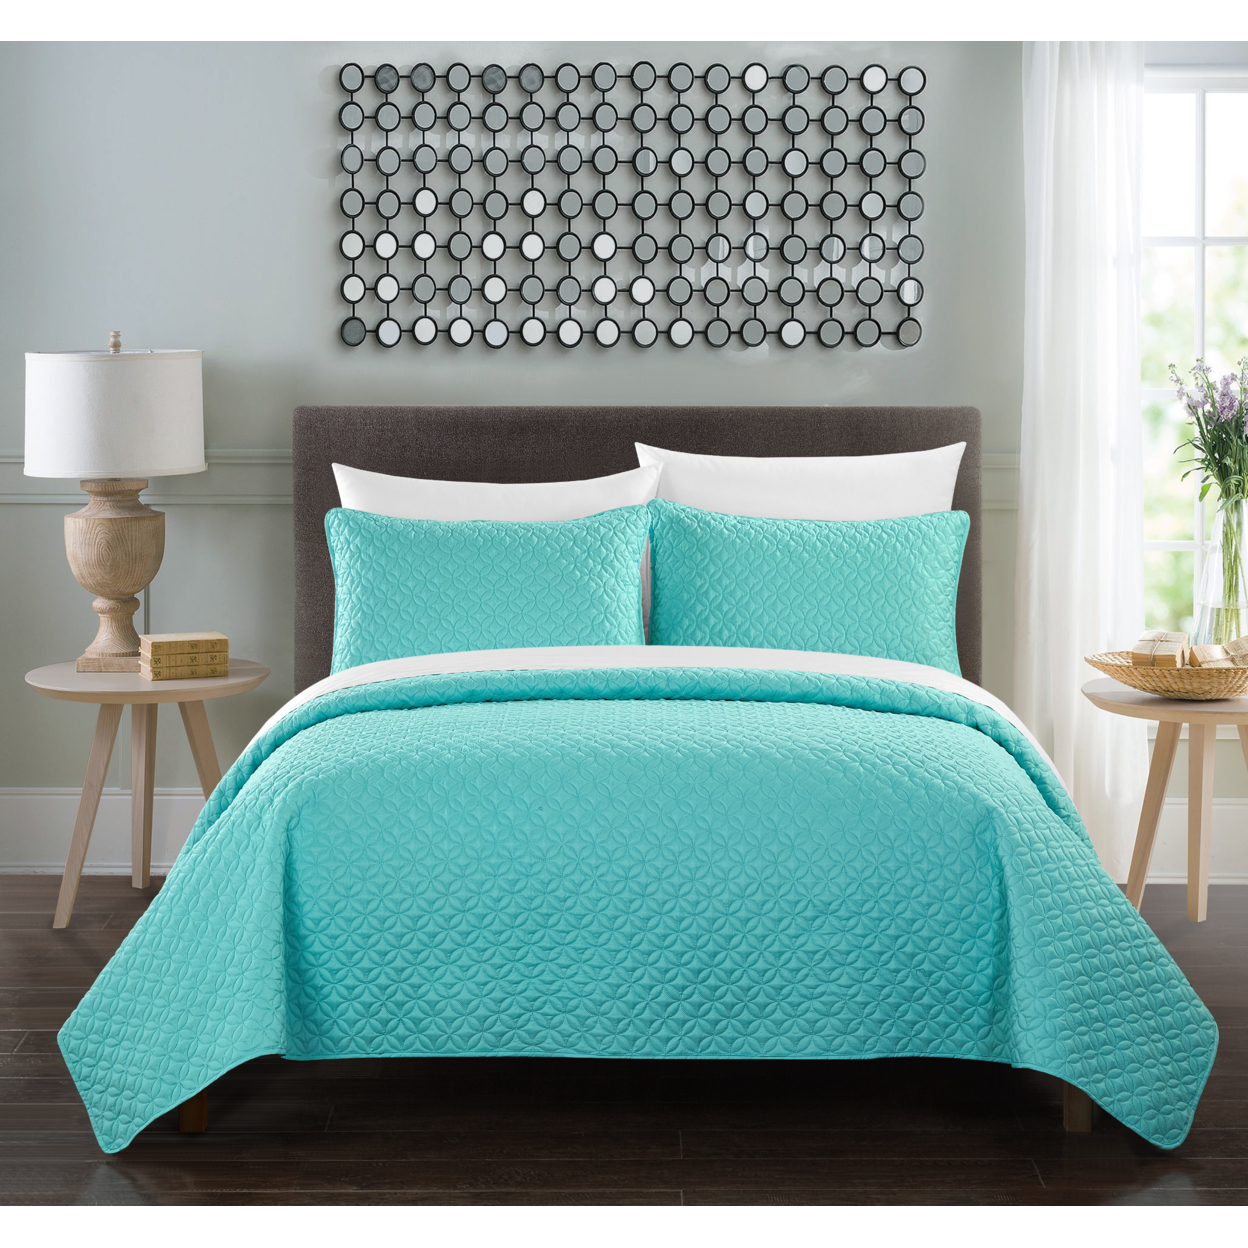 Gideon 3 Or 2 Piece Quilt Cover Set Rose Star Geometric Quilted Bedding - Aqua, King